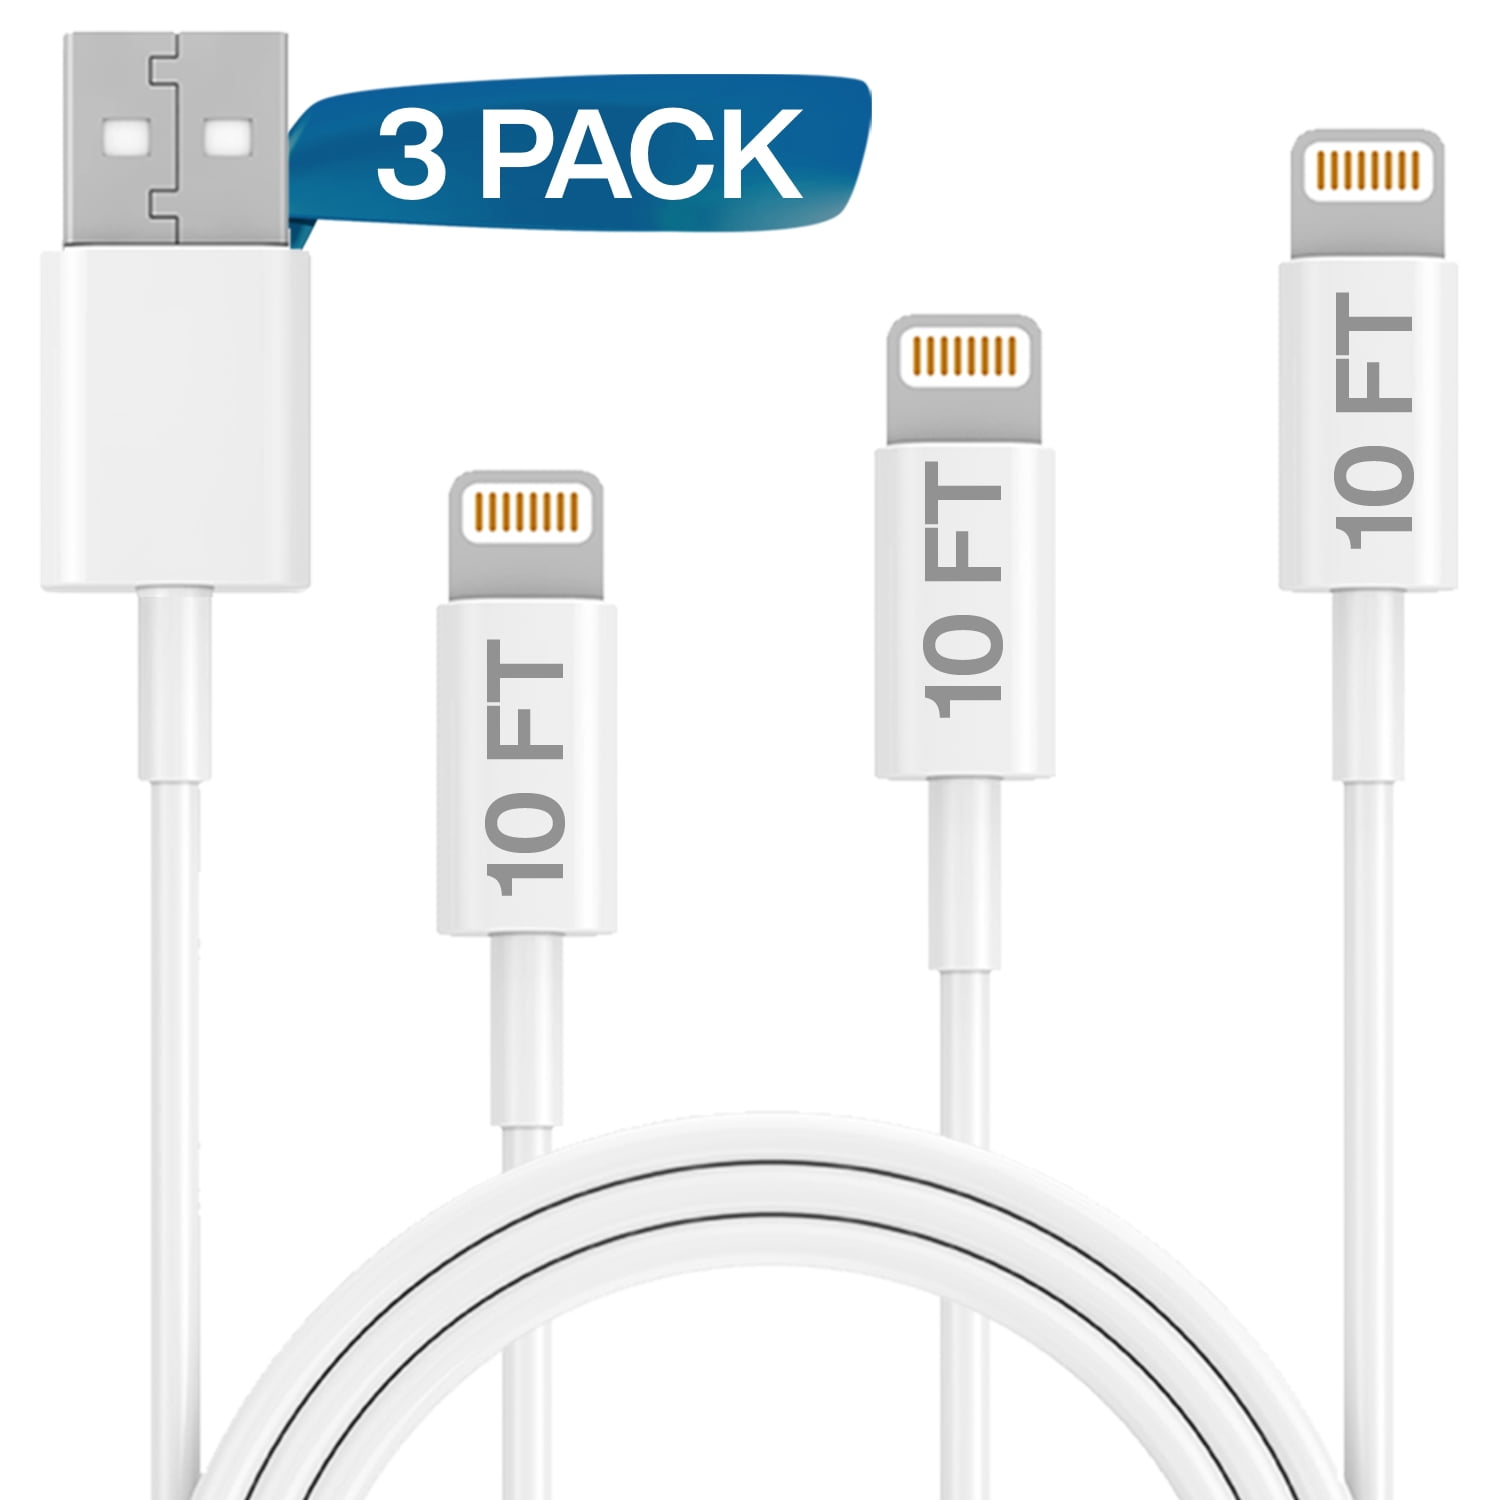 iPhone Charger,Mfi Certified 3pack 10FT Lightning Cables to USB Syncing Data and Nylon Braided Cord Charger for iPhone XS/Max/XR/X/8/6Plus/6S/7Plus/7/8Plus/SE/iPad and More 